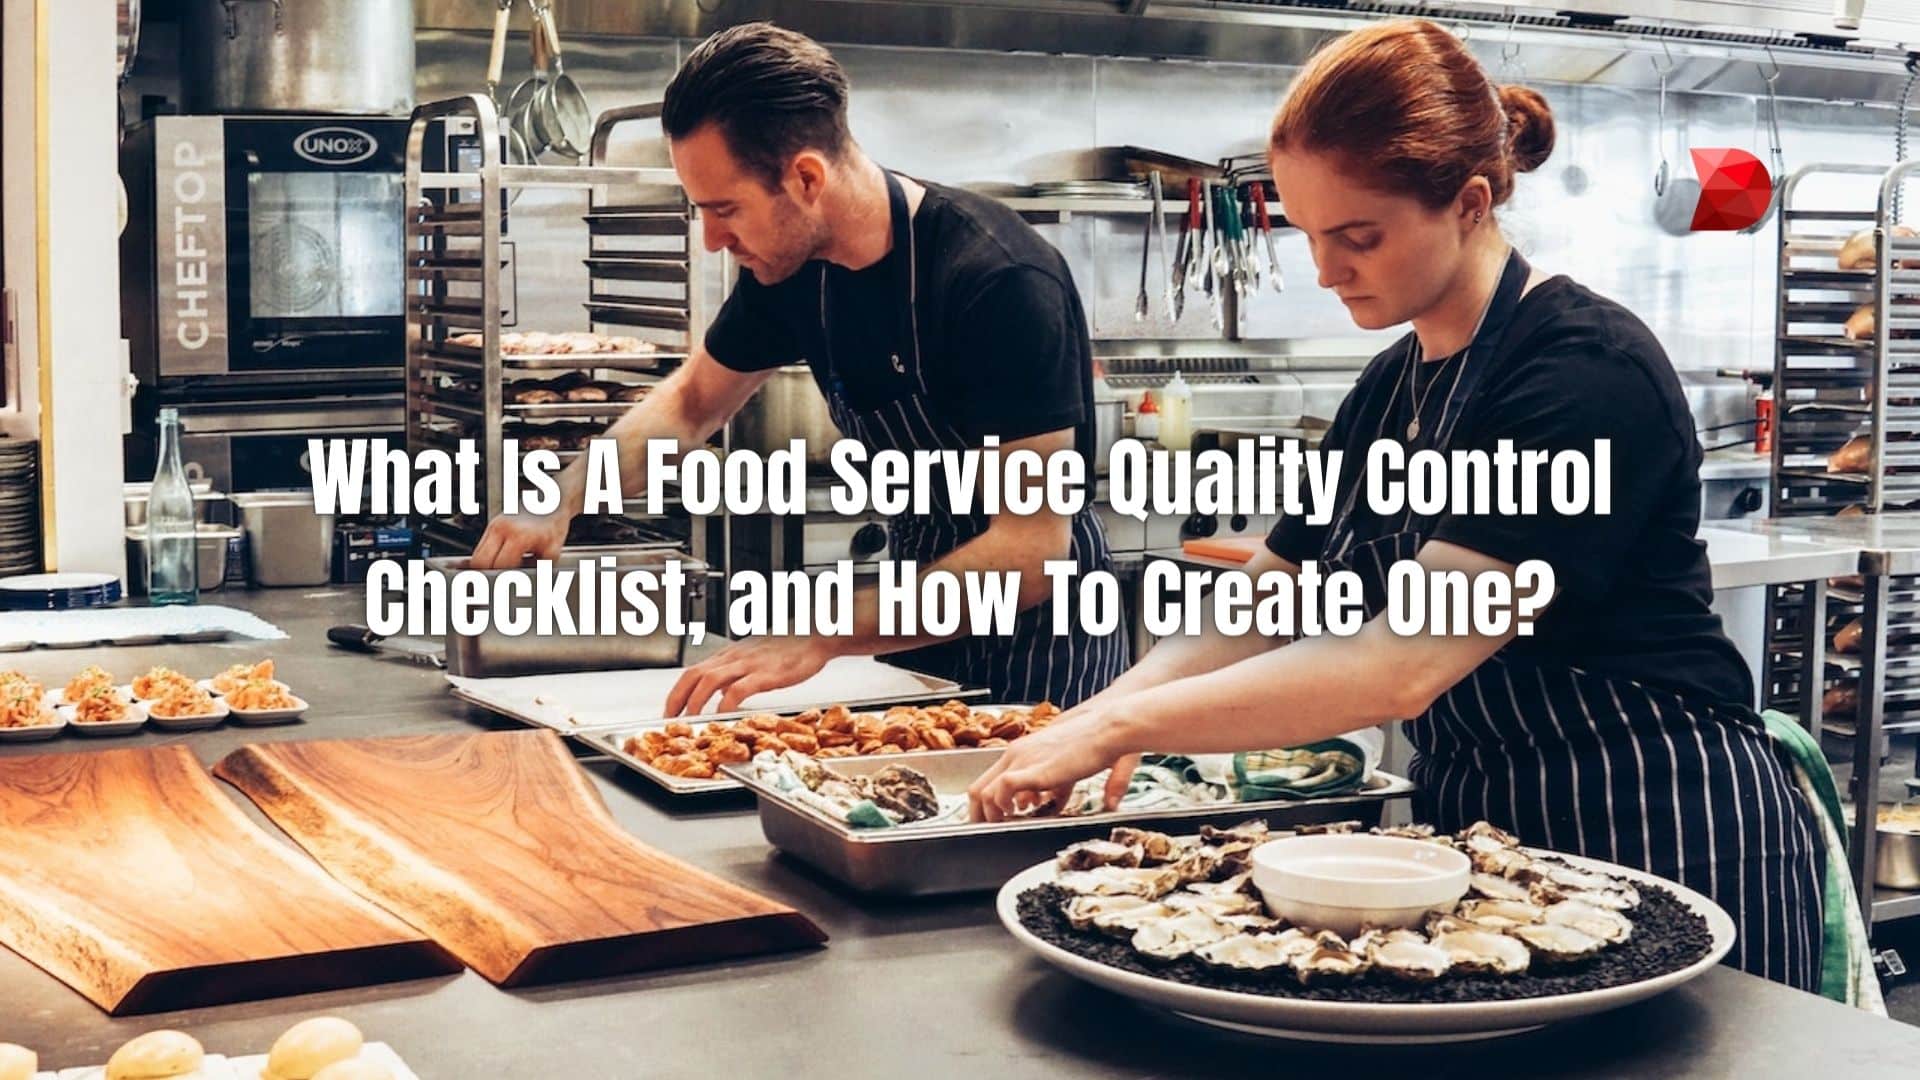 What Is A Food Service Quality Control Checklist, and How To Create One